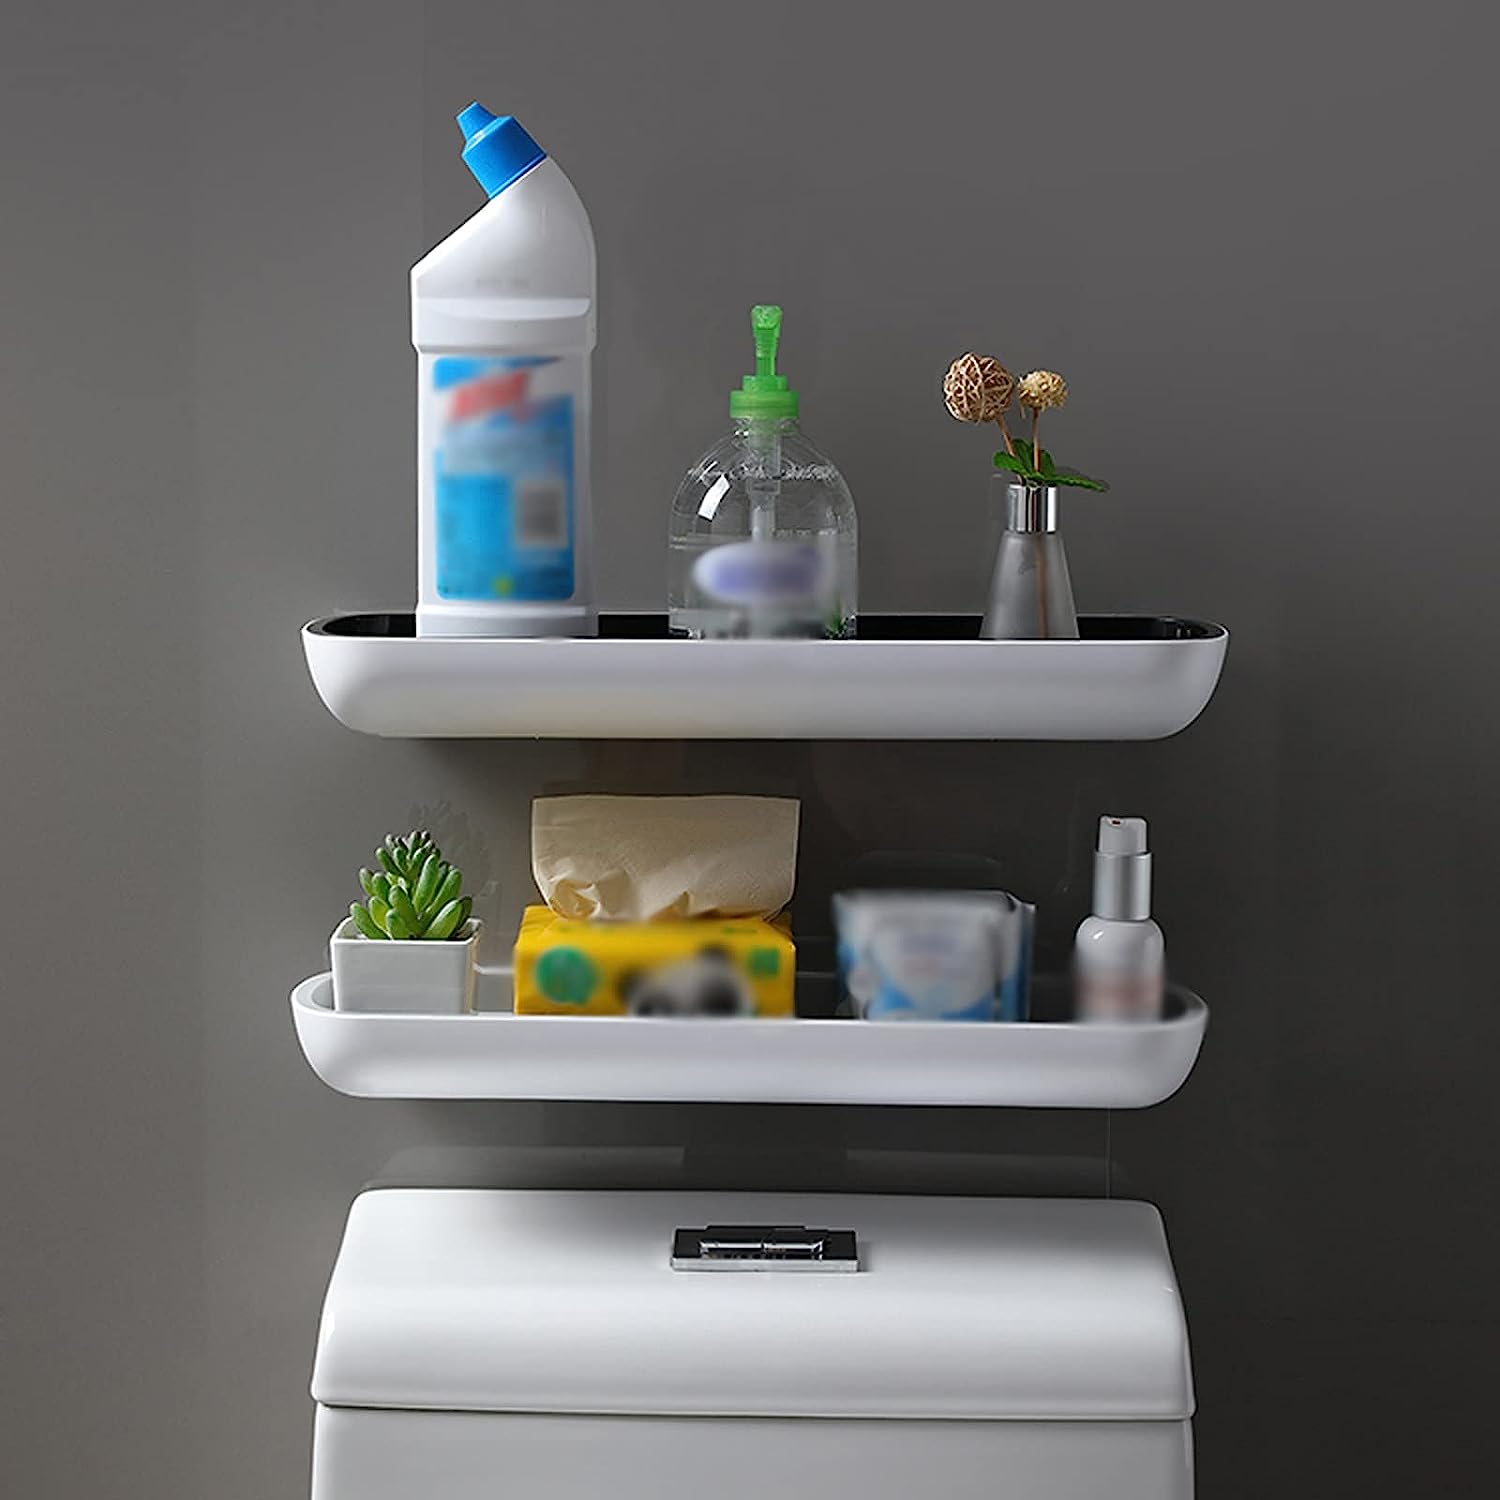 A wall-mounted bathroom storage rack with a shelf positioned above a toilet, providing convenient storage space without the need for drilling